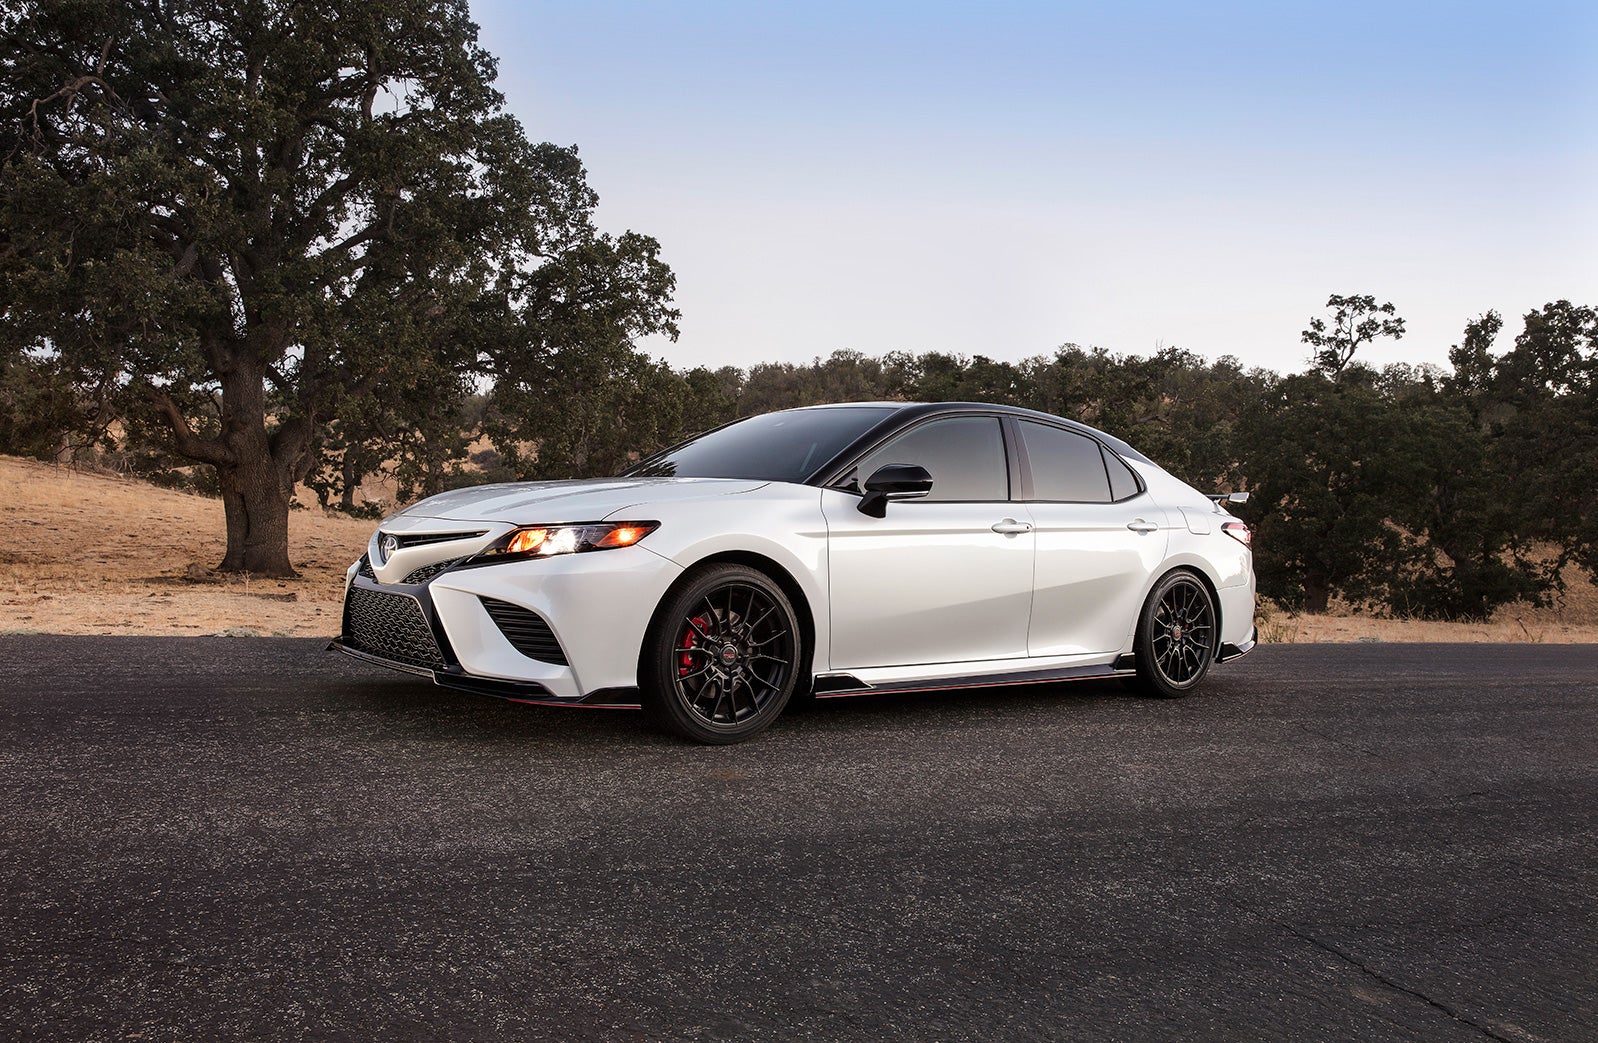 What you can get to personalize your vehicle at Fiore Toyota in Hollidaysburg | the profile of the white 2020 camry